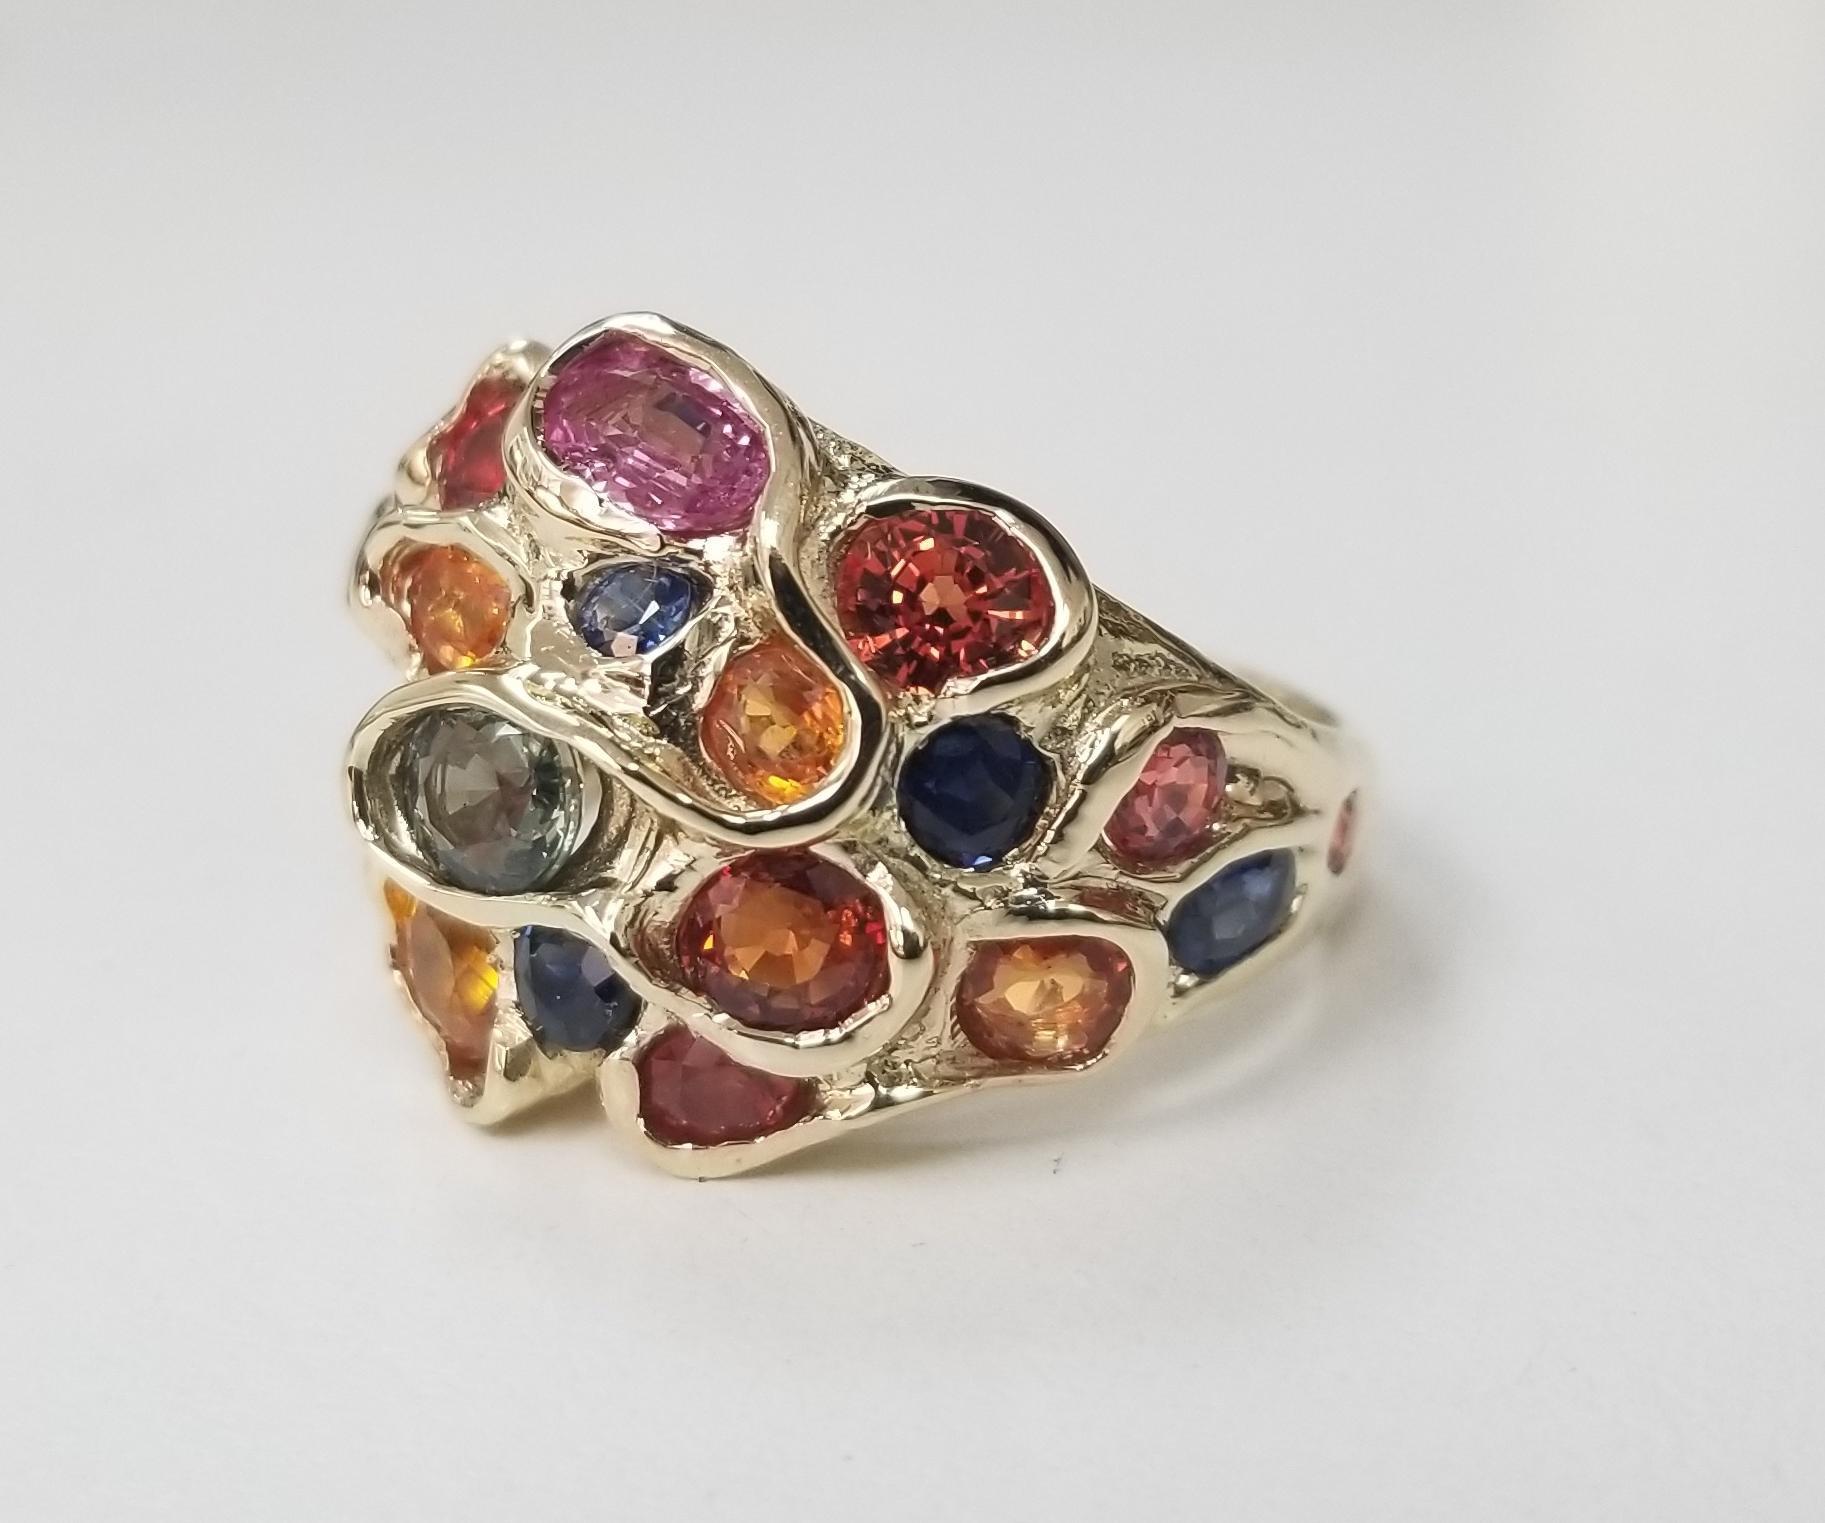 14 karat multicolored sapphire cluster ring, containing 25 round sapphires (orange, yellow, blue, green and lavender) of very fine gem quality weighing 6.43cts.  This ring is a size 7 but we will size to fit for free.